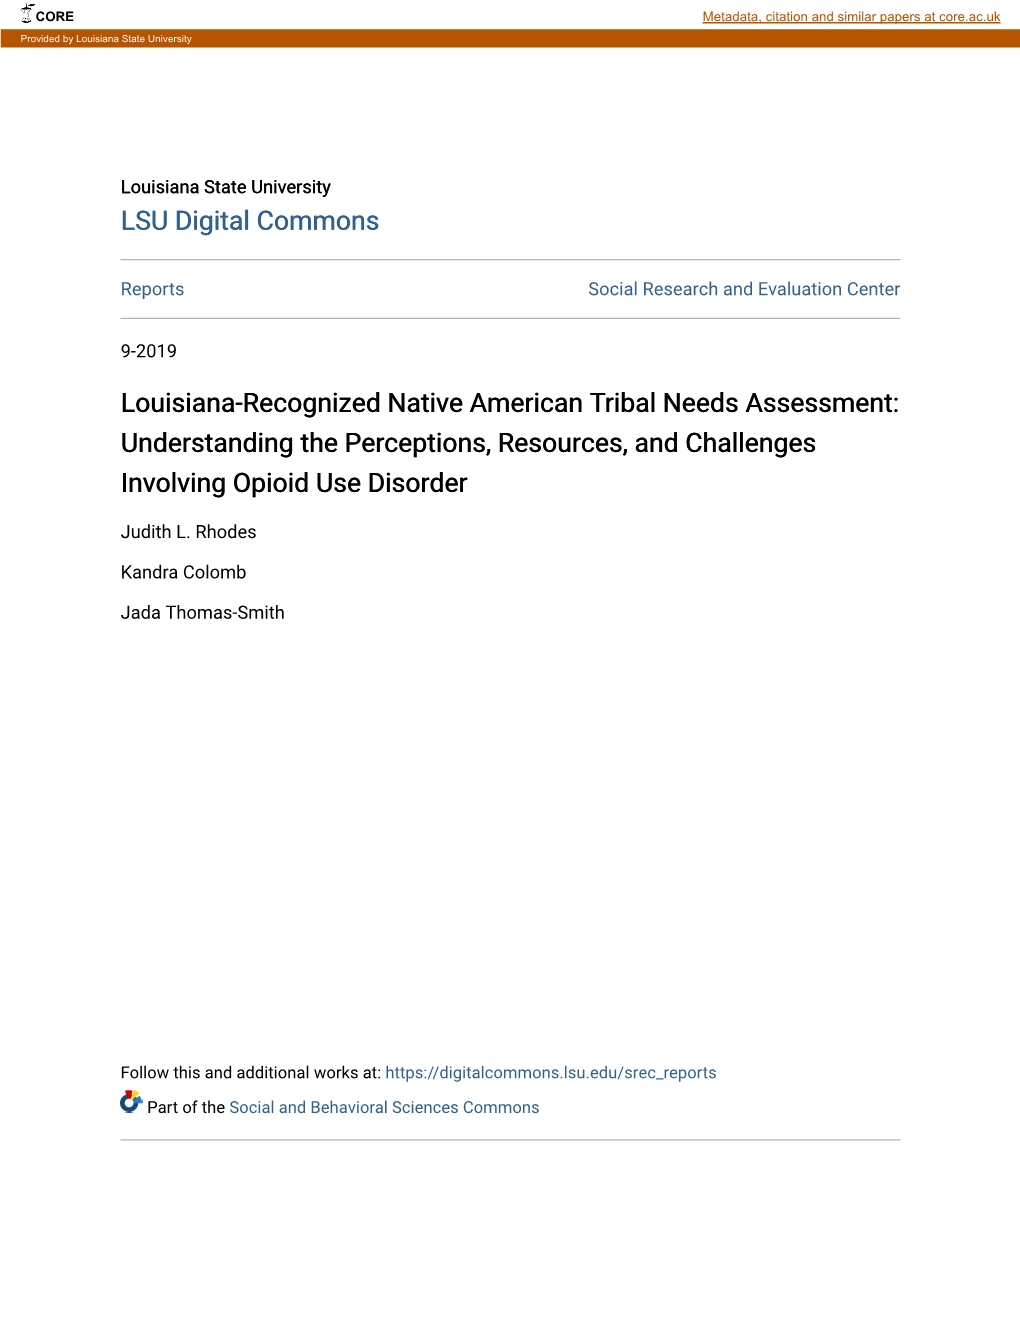 Louisiana-Recognized Native American Tribal Needs Assessment: Understanding the Perceptions, Resources, and Challenges Involving Opioid Use Disorder